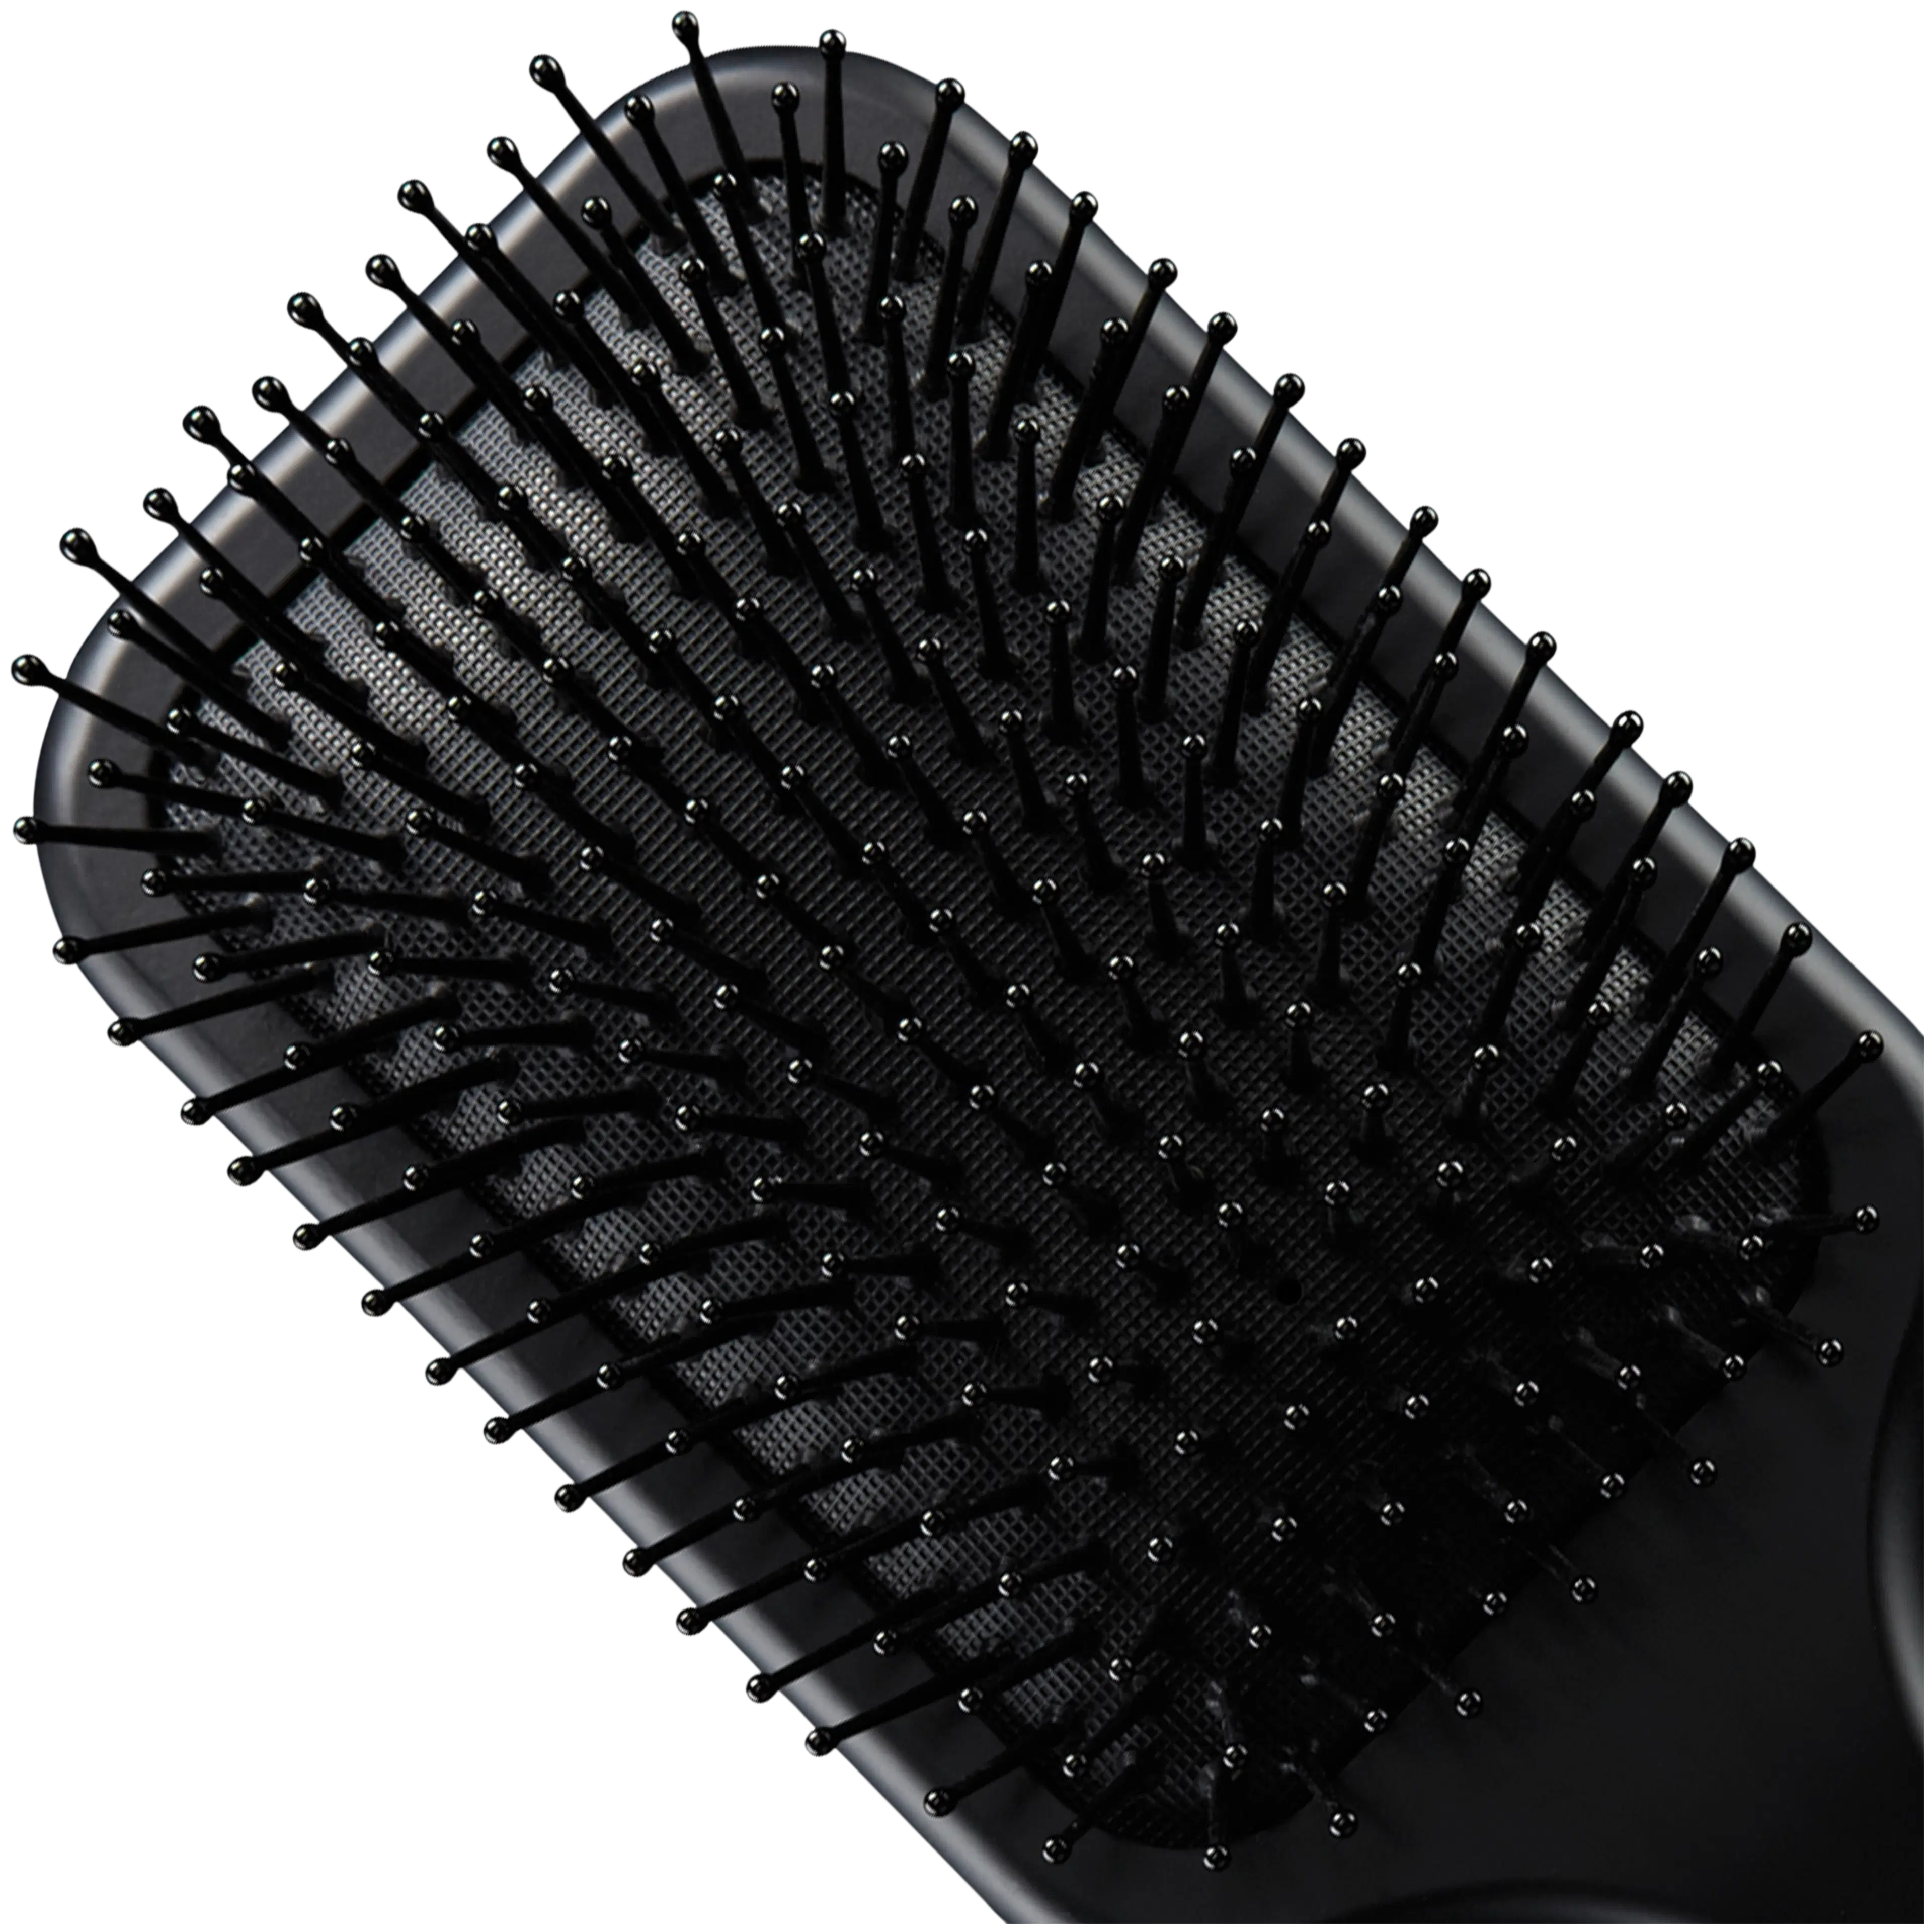 ghd the all-rounder paddle brush lapioharja